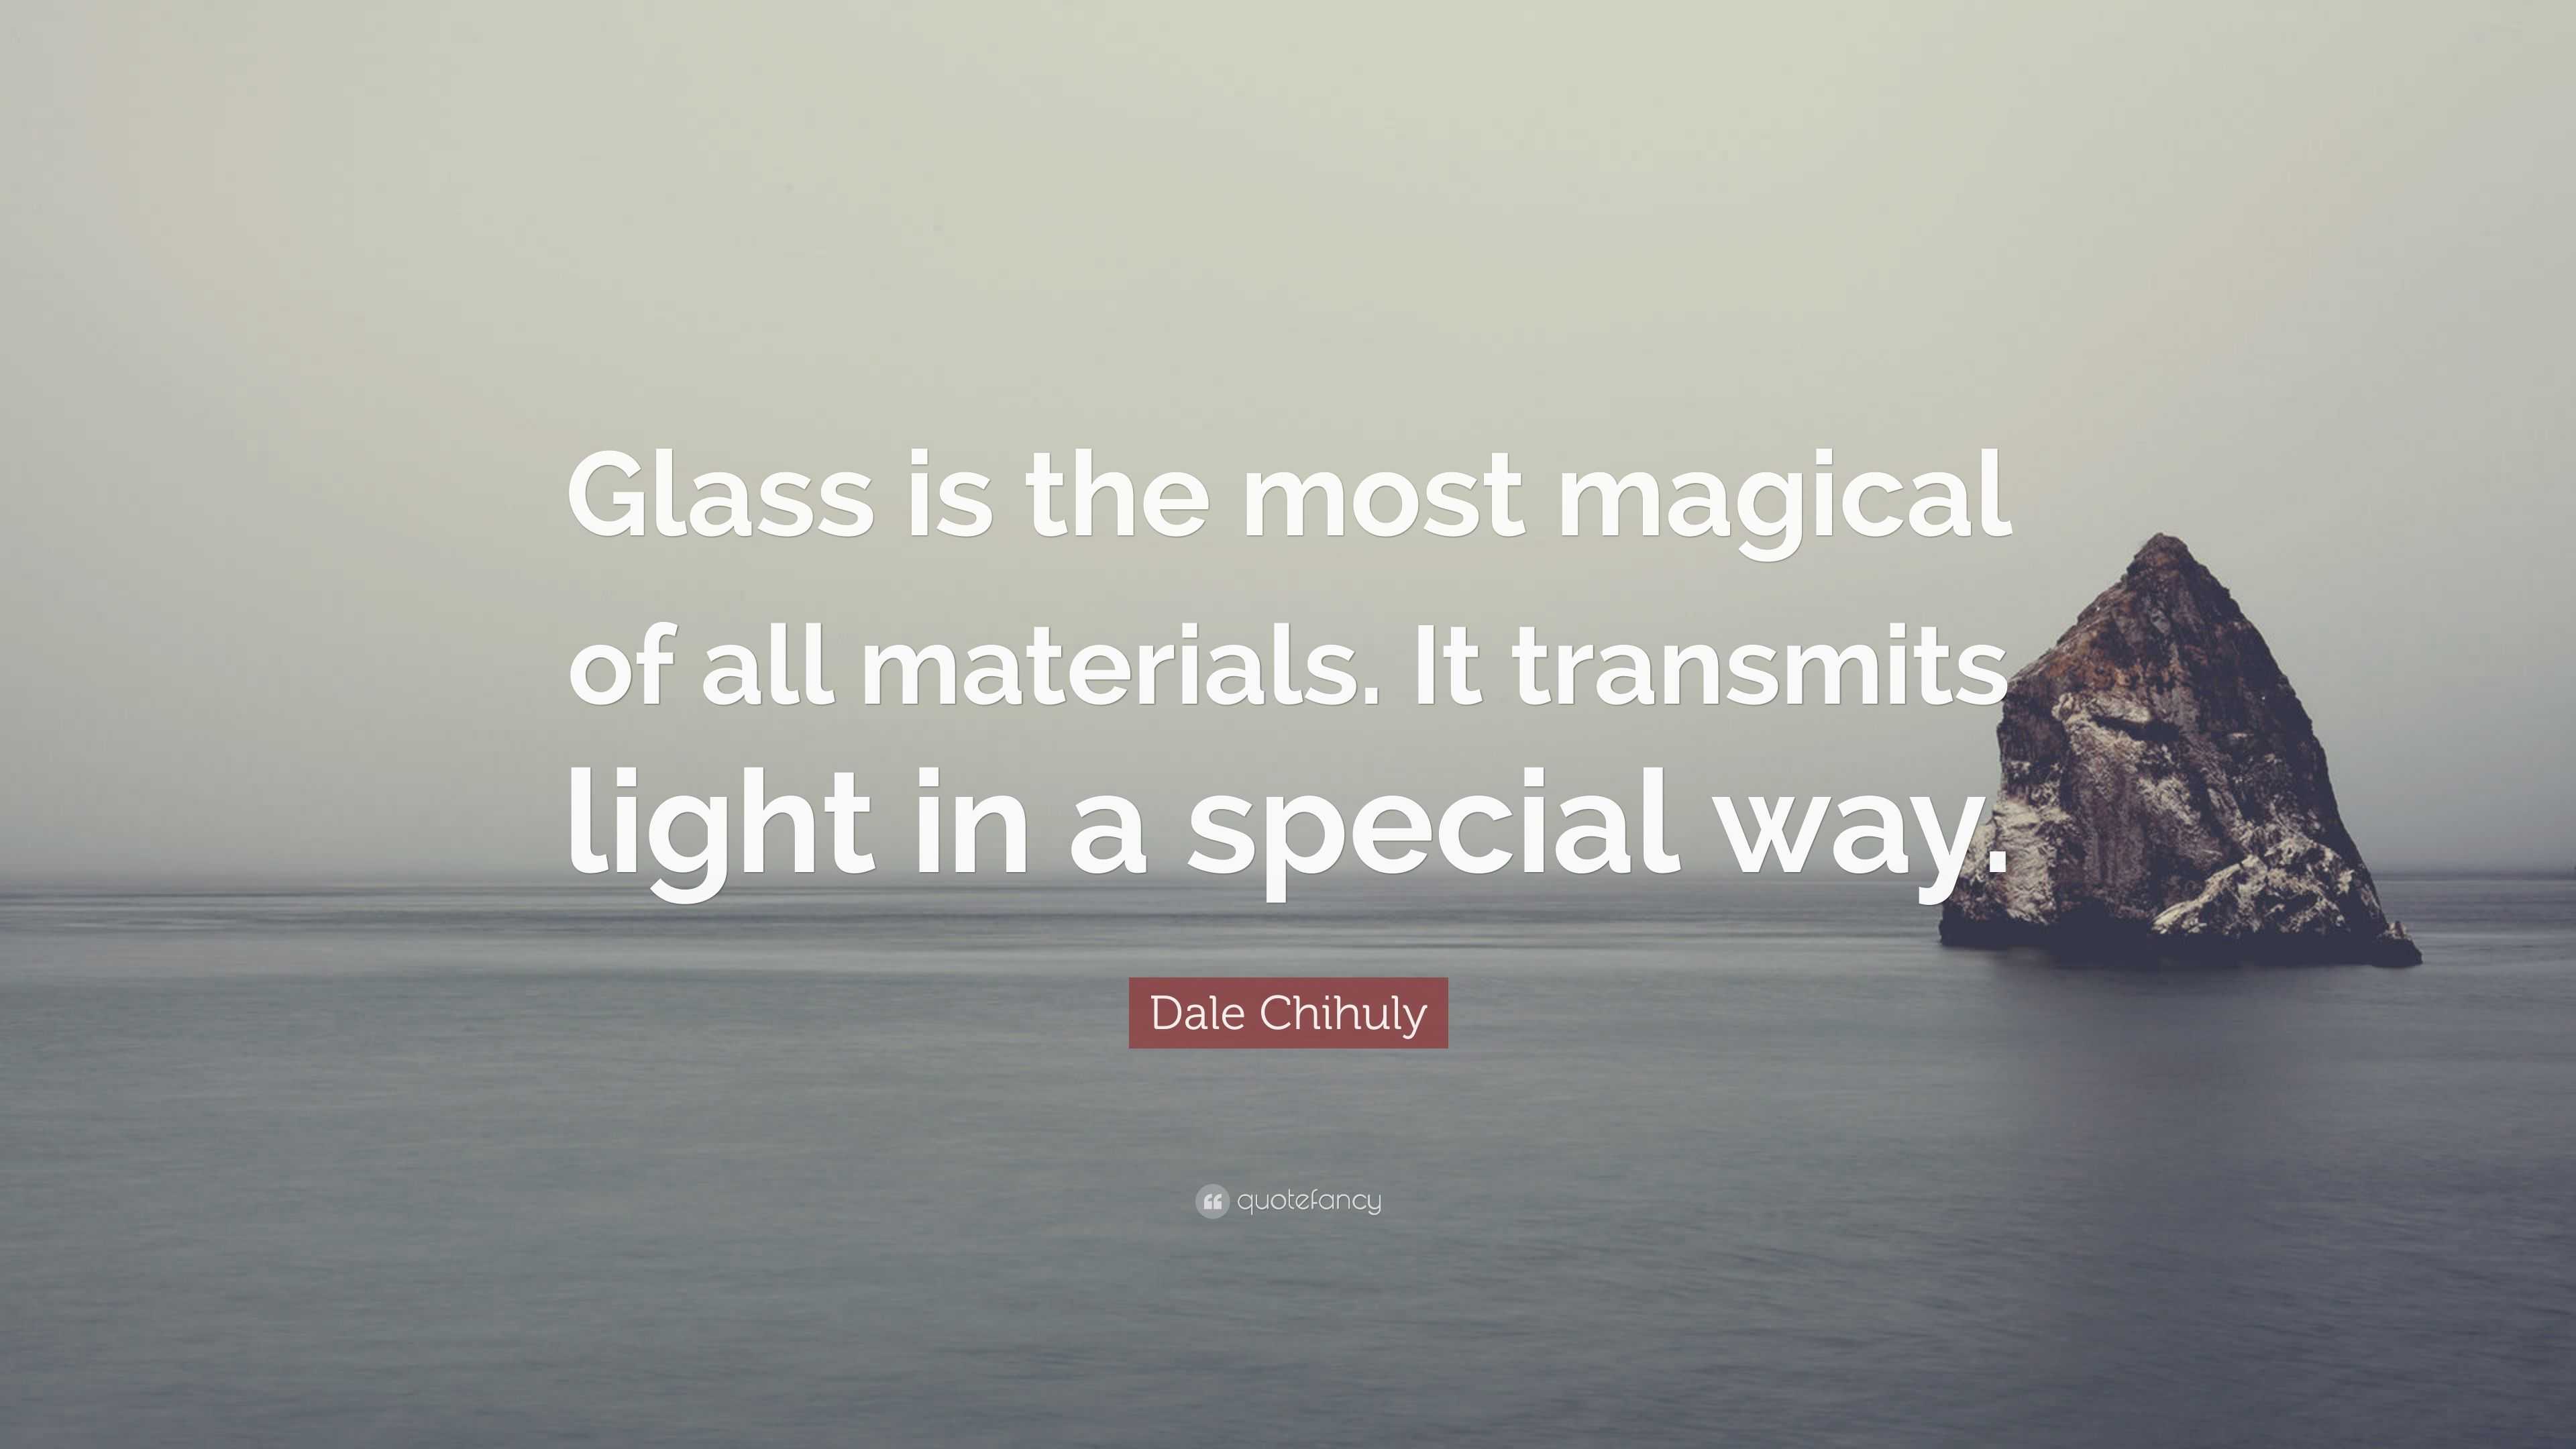 Dale Chihuly Quote: "Glass is the most magical of all materials. It transmits light in a special ...